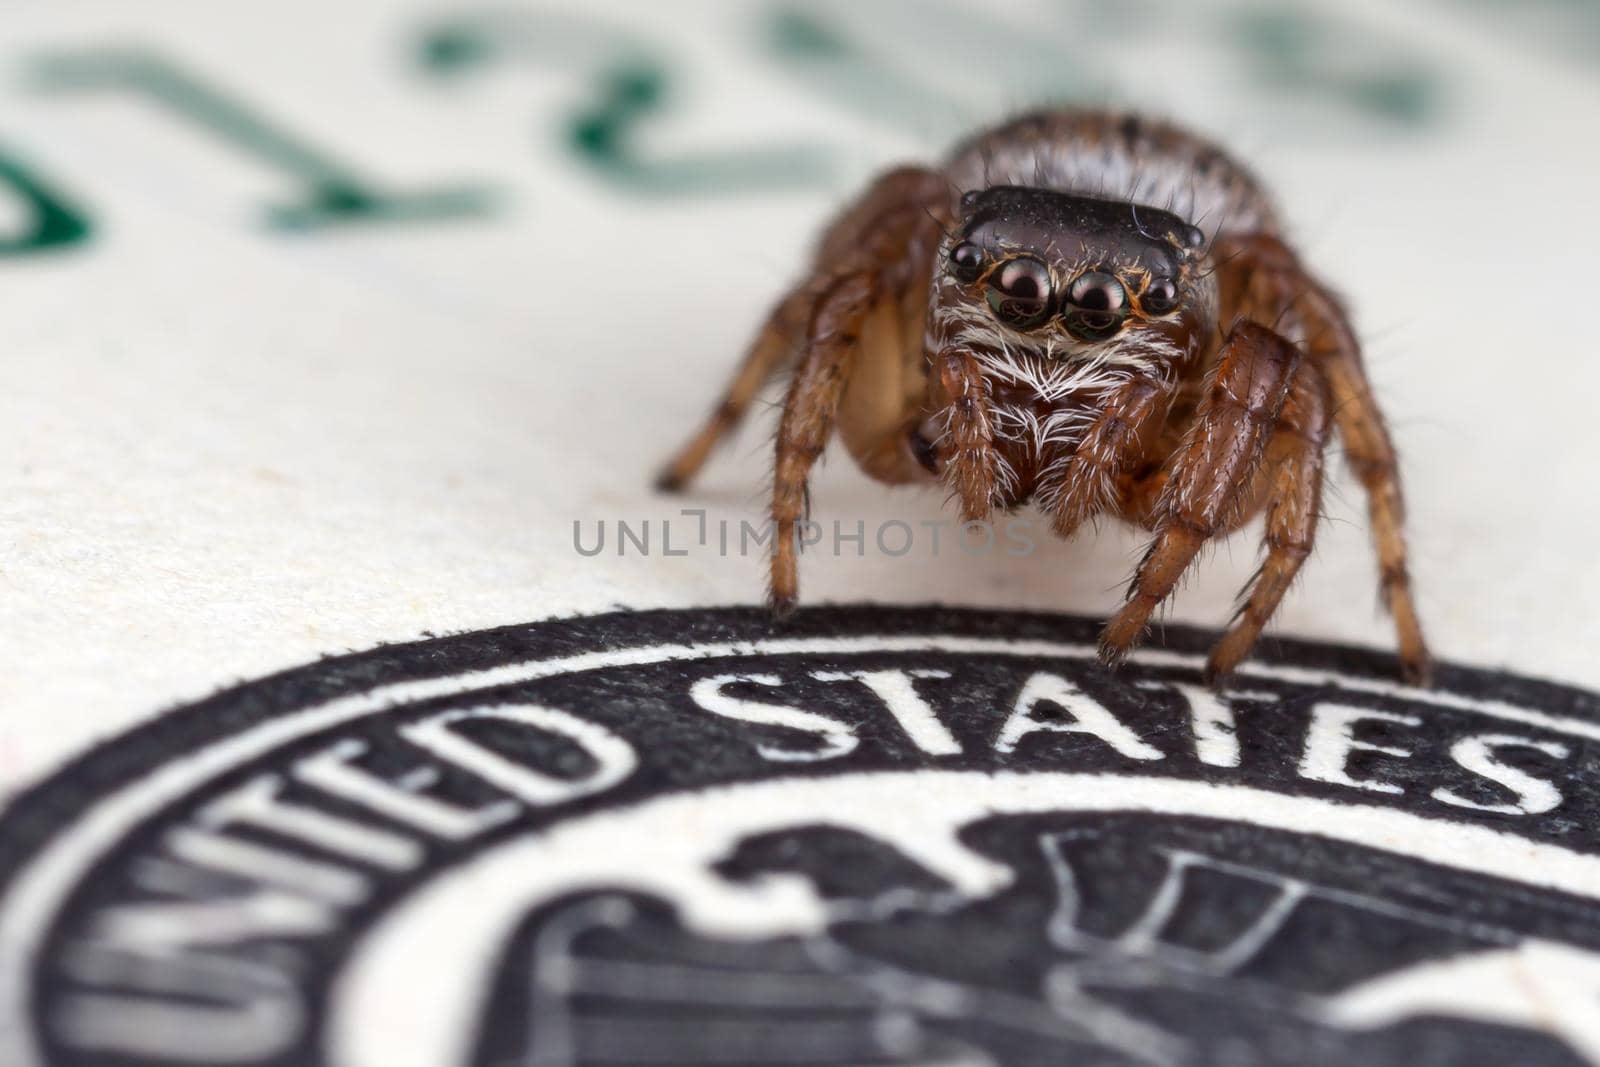 Jumping spider on hundred dollars banknote, Photo in close up